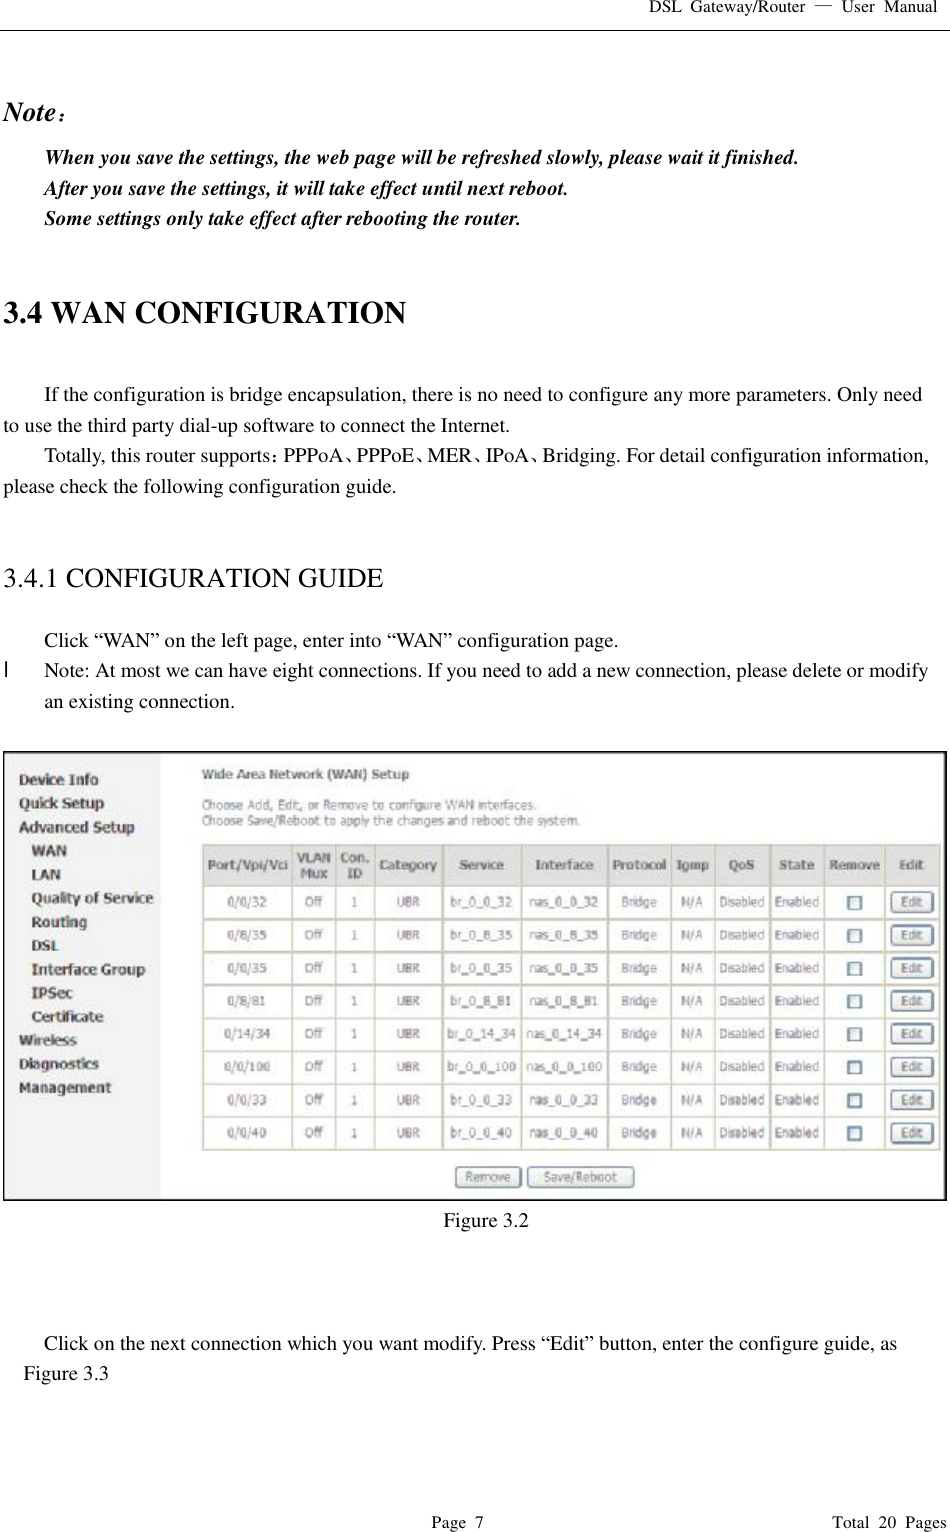 DSL Gateway/Router  — User Manual  Page 7                                       Total 20 Pages  Note： When you save the settings, the web page will be refreshed slowly, please wait it finished. After you save the settings, it will take effect until next reboot. Some settings only take effect after rebooting the router.   3.4 WAN CONFIGURATION  If the configuration is bridge encapsulation, there is no need to configure any more parameters. Only need to use the third party dial-up software to connect the Internet.  Totally, this router supports：PPPoA、PPPoE、MER、IPoA、Bridging. For detail configuration information, please check the following configuration guide.   3.4.1 CONFIGURATION GUIDE  Click “WAN” on the left page, enter into “WAN” configuration page. l  Note: At most we can have eight connections. If you need to add a new connection, please delete or modify an existing connection.    Figure 3.2    Click on the next connection which you want modify. Press “Edit” button, enter the configure guide, as Figure 3.3 